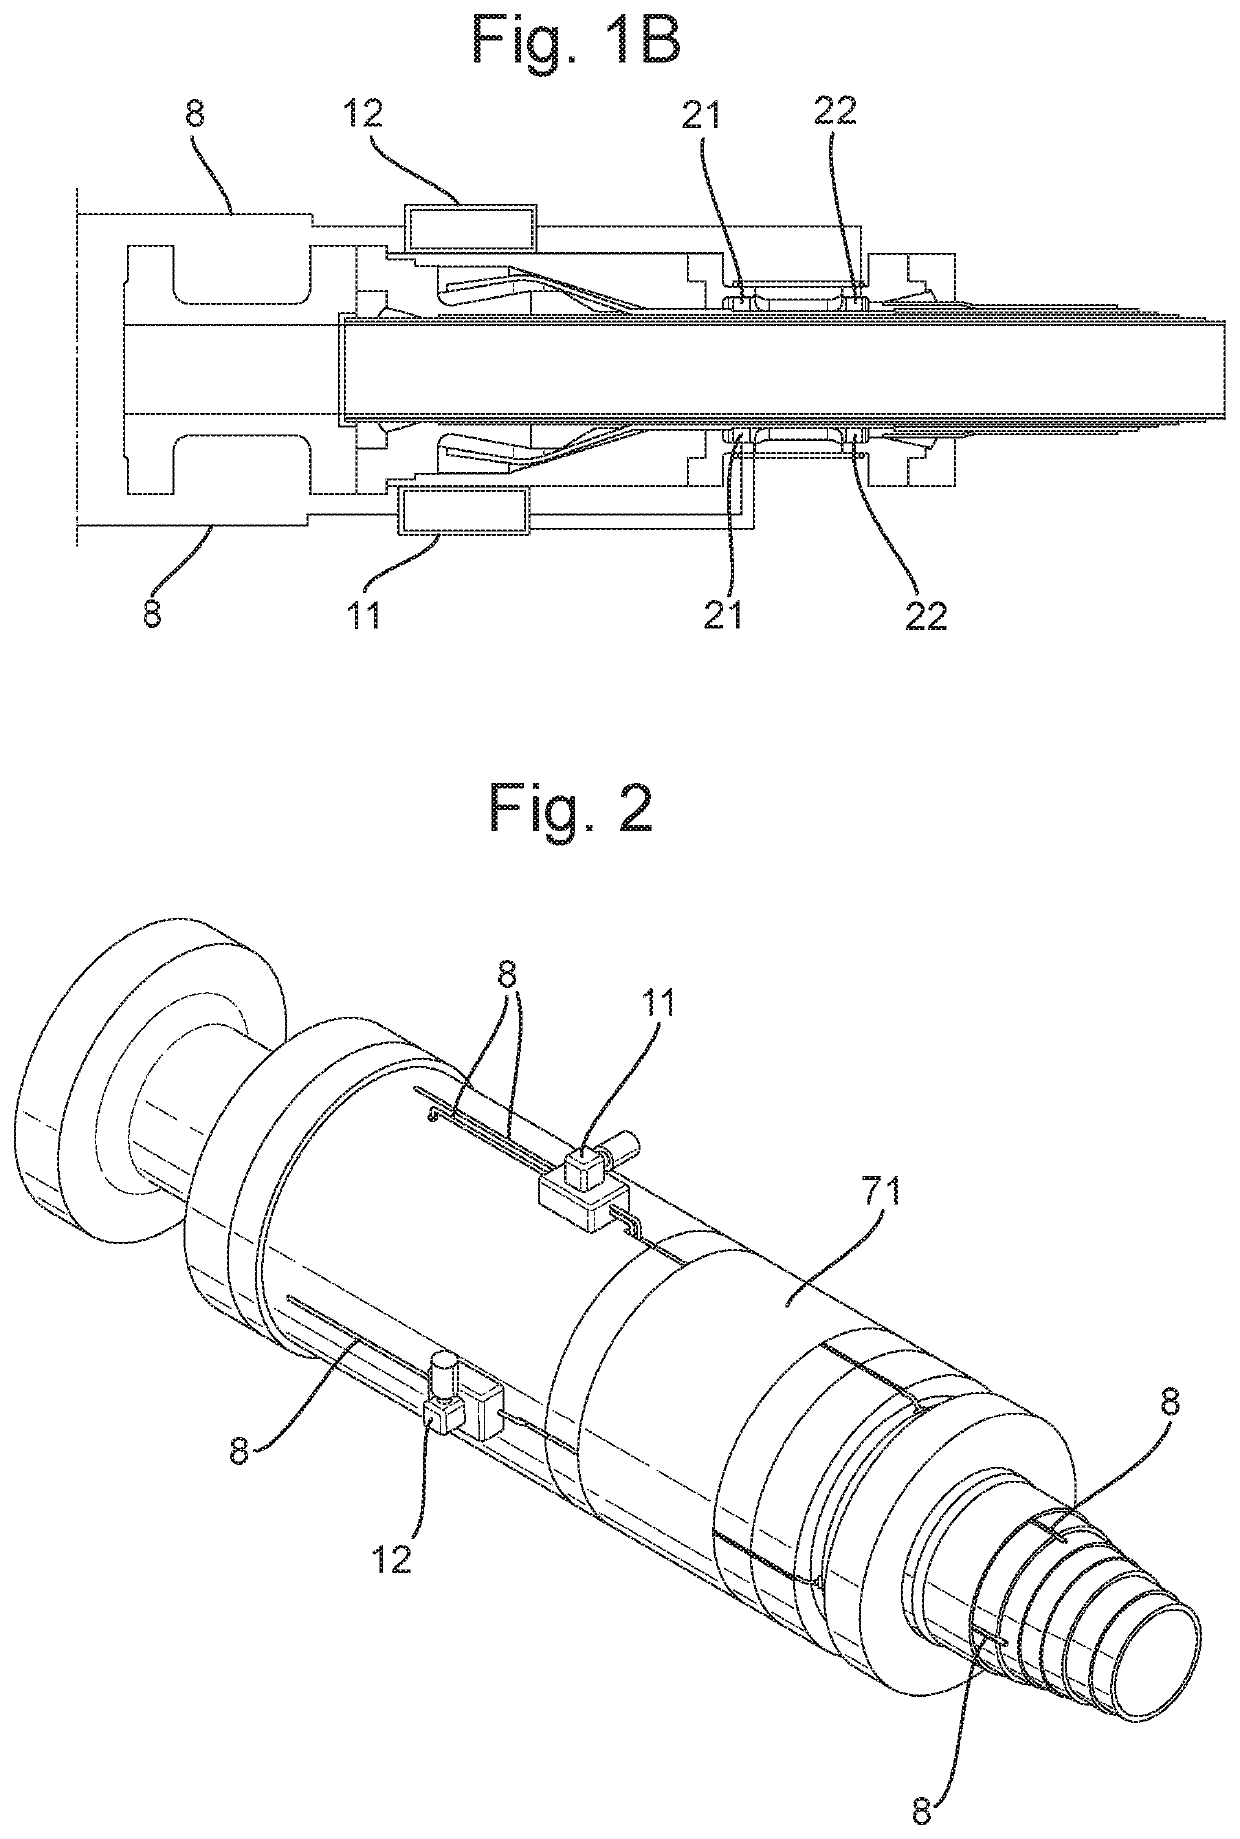 Flexible pipe connector suitable for effecting control and forced circulation of anticorrosive fluids through the annulus of the flexible pipe